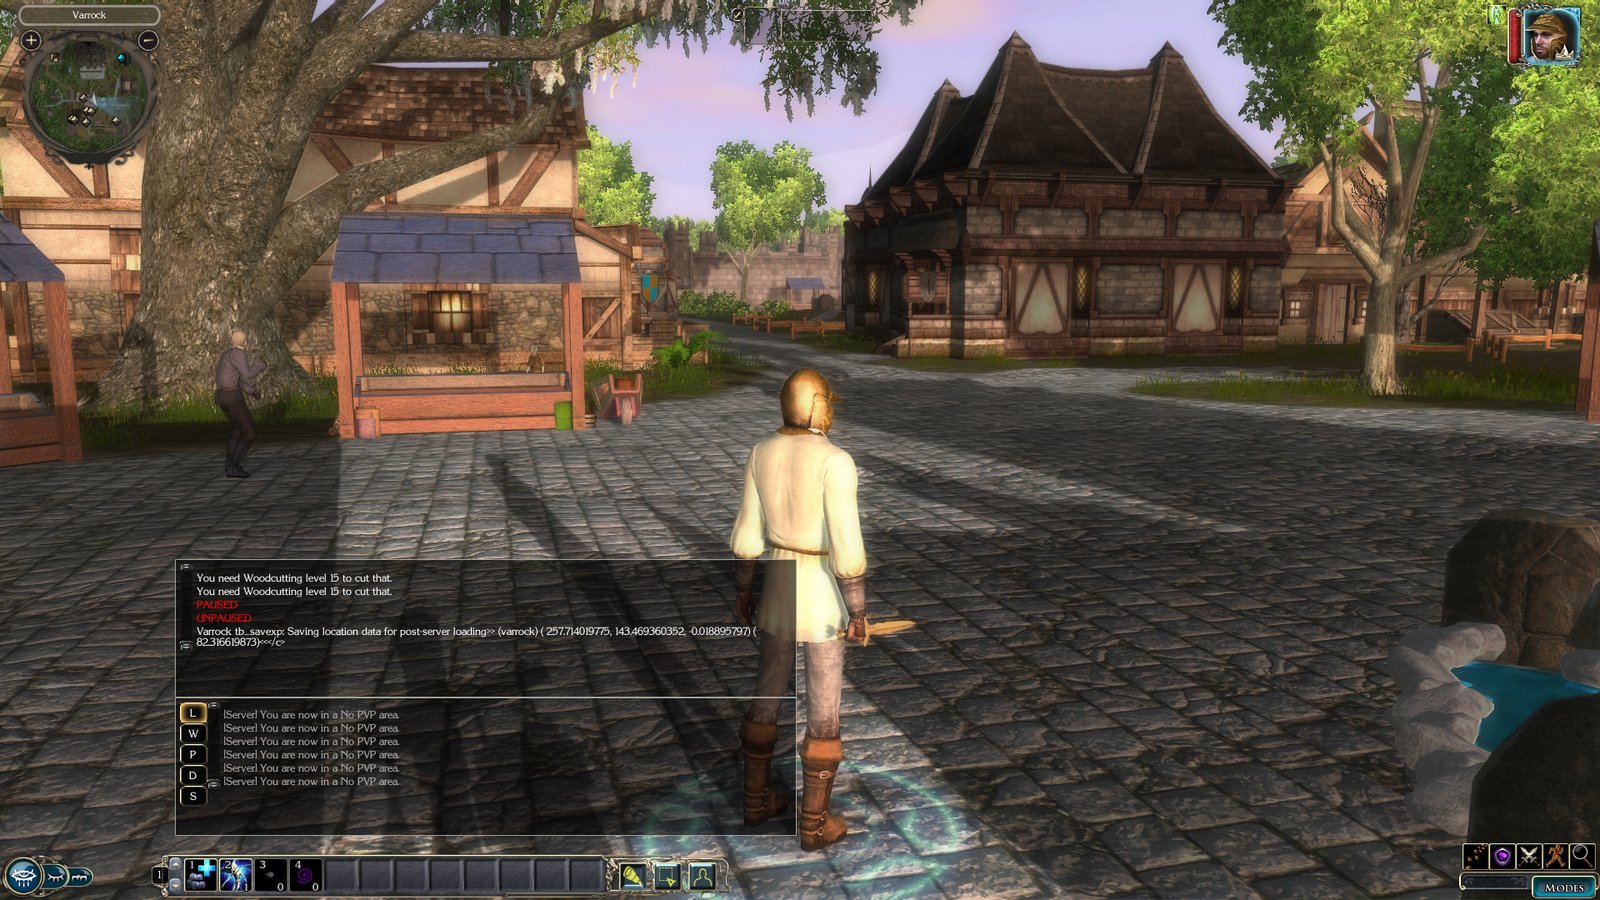 Neverwinter Nights 2 gameplay of a man standing in an urban setting.